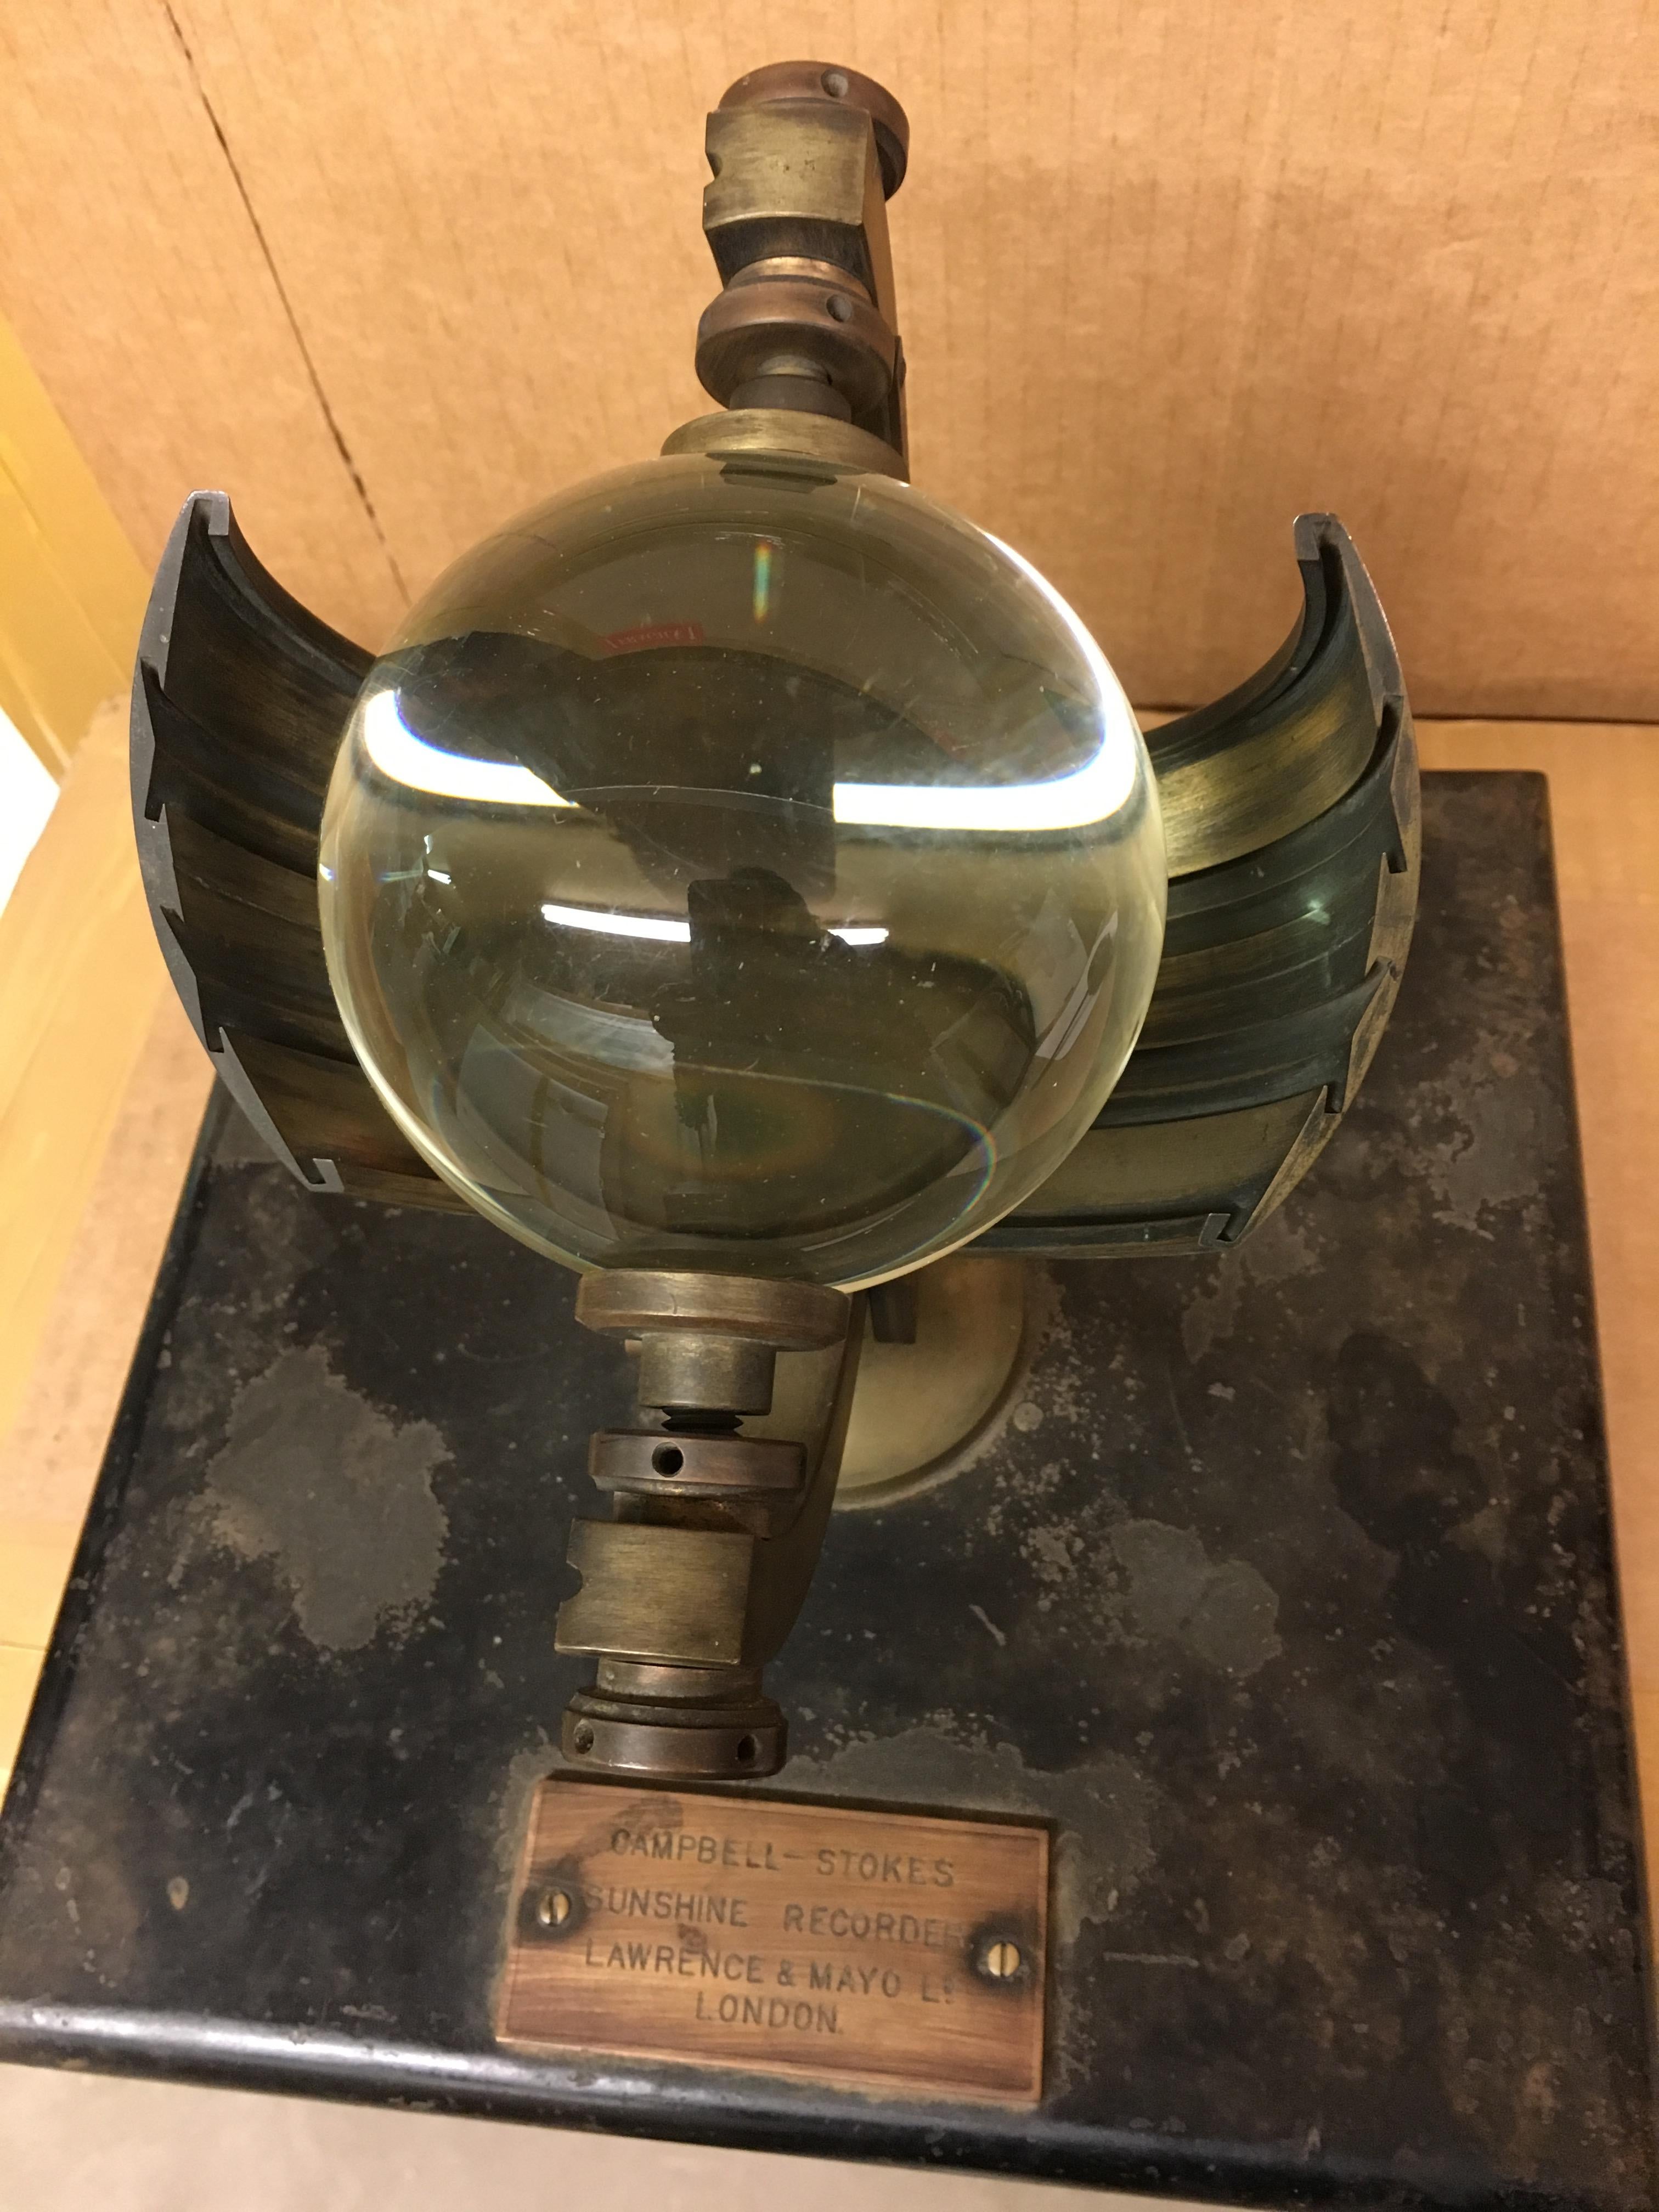 Brass Campbell Stokes Sunshine Recorder Instrument by Lawrence and Mayo, London